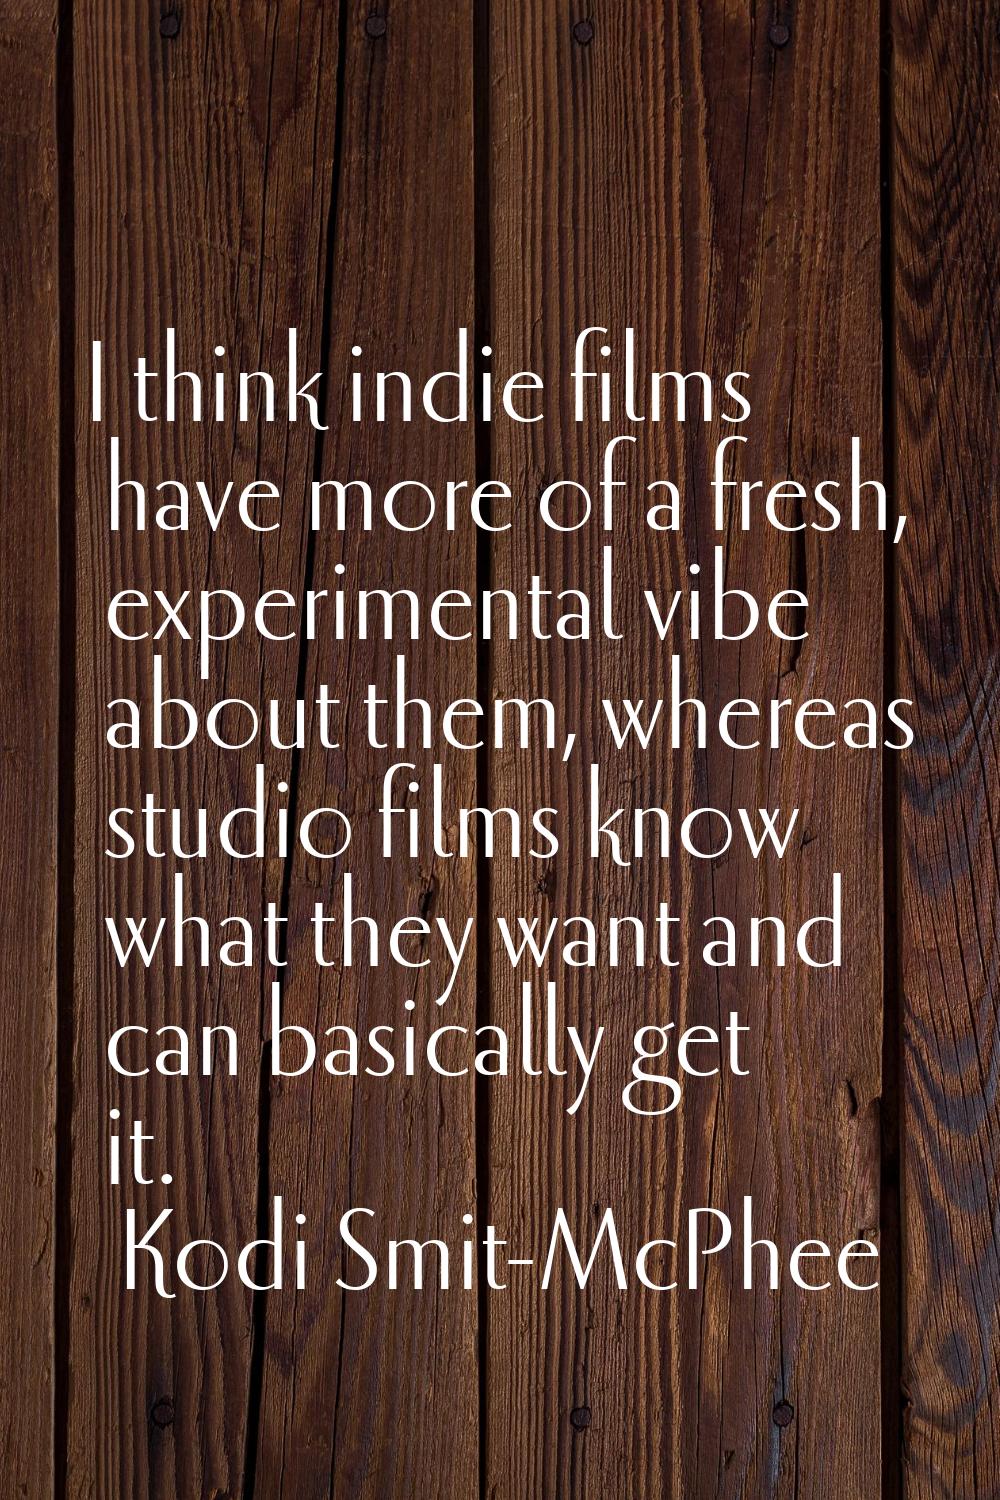 I think indie films have more of a fresh, experimental vibe about them, whereas studio films know w